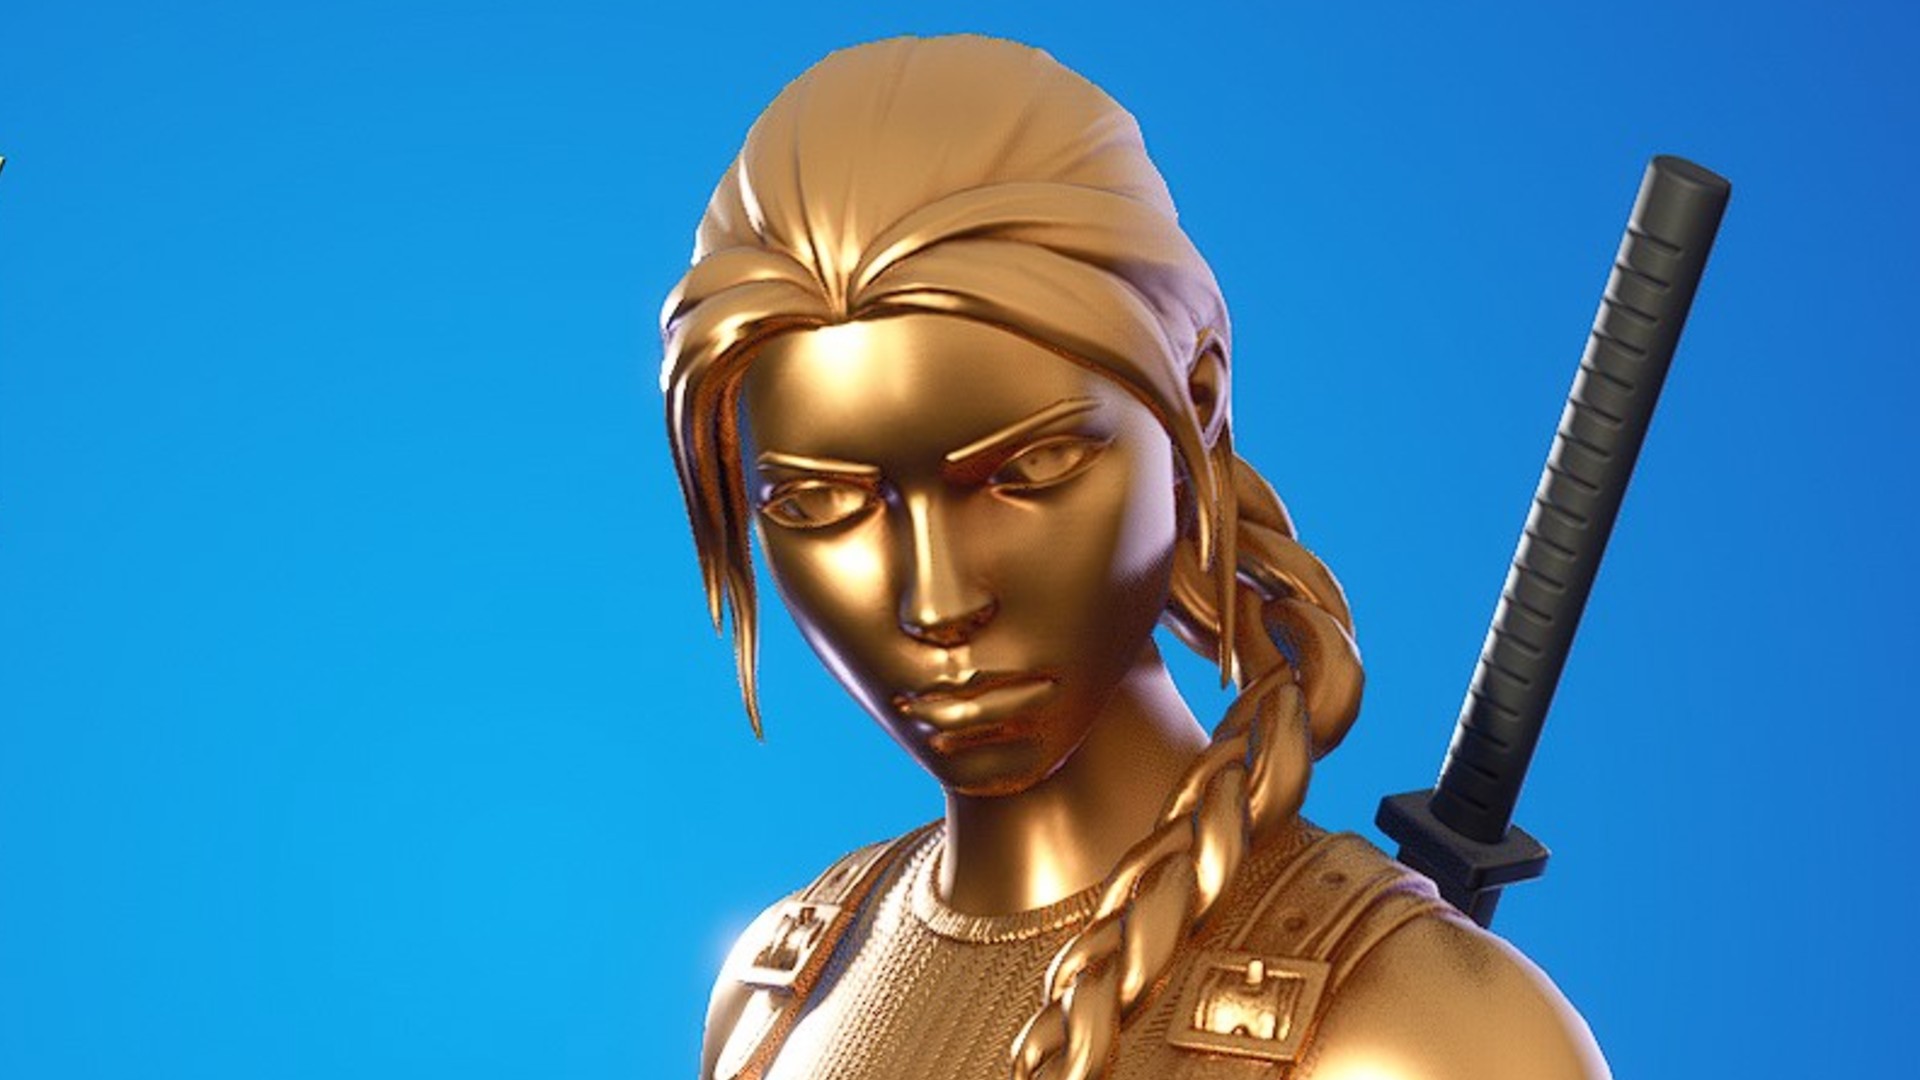  How to get gold Lara Croft in Fortnite 